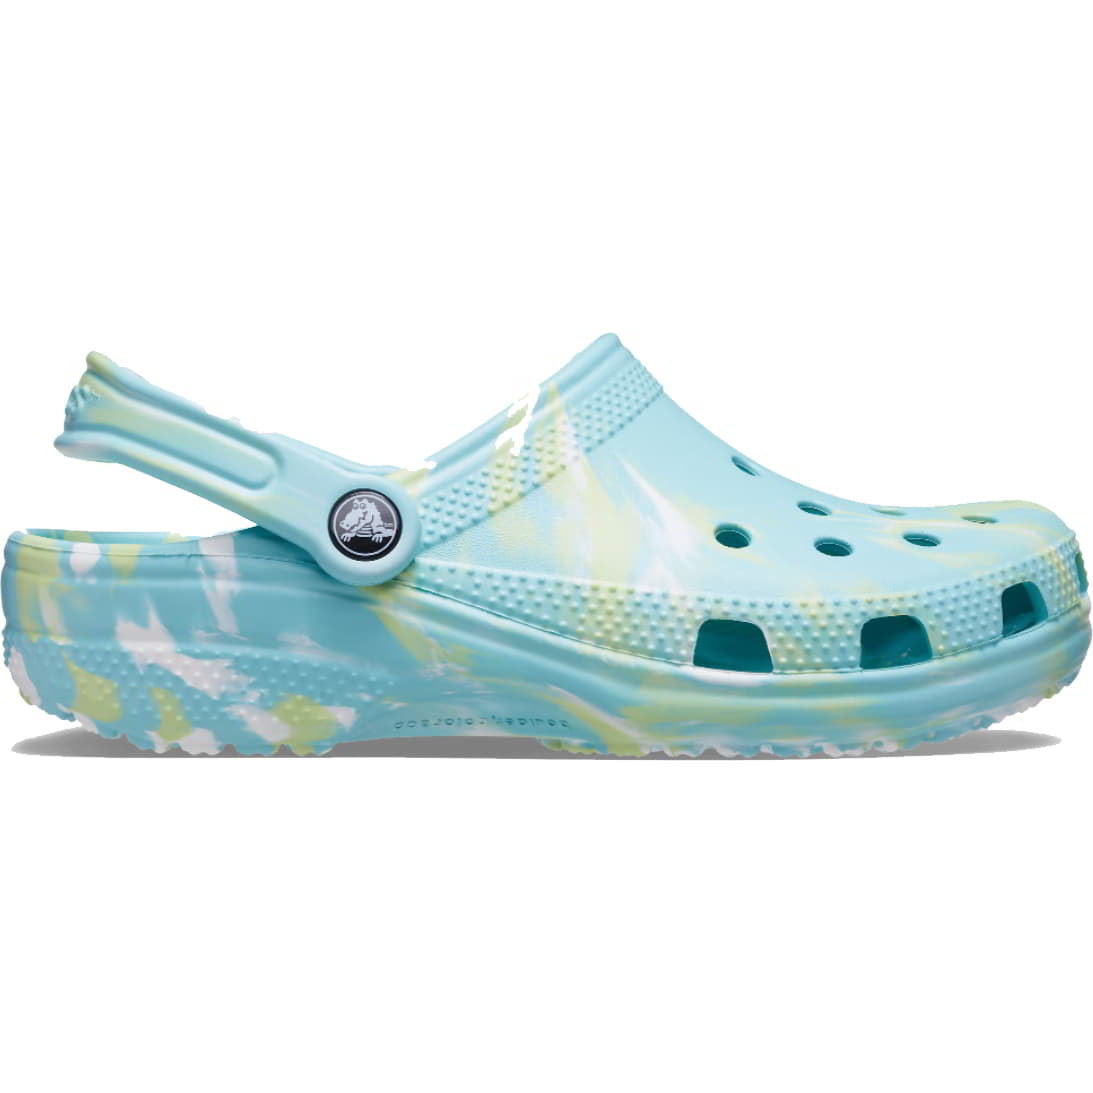 crocs womens classic clog marble sandals - pure water multi